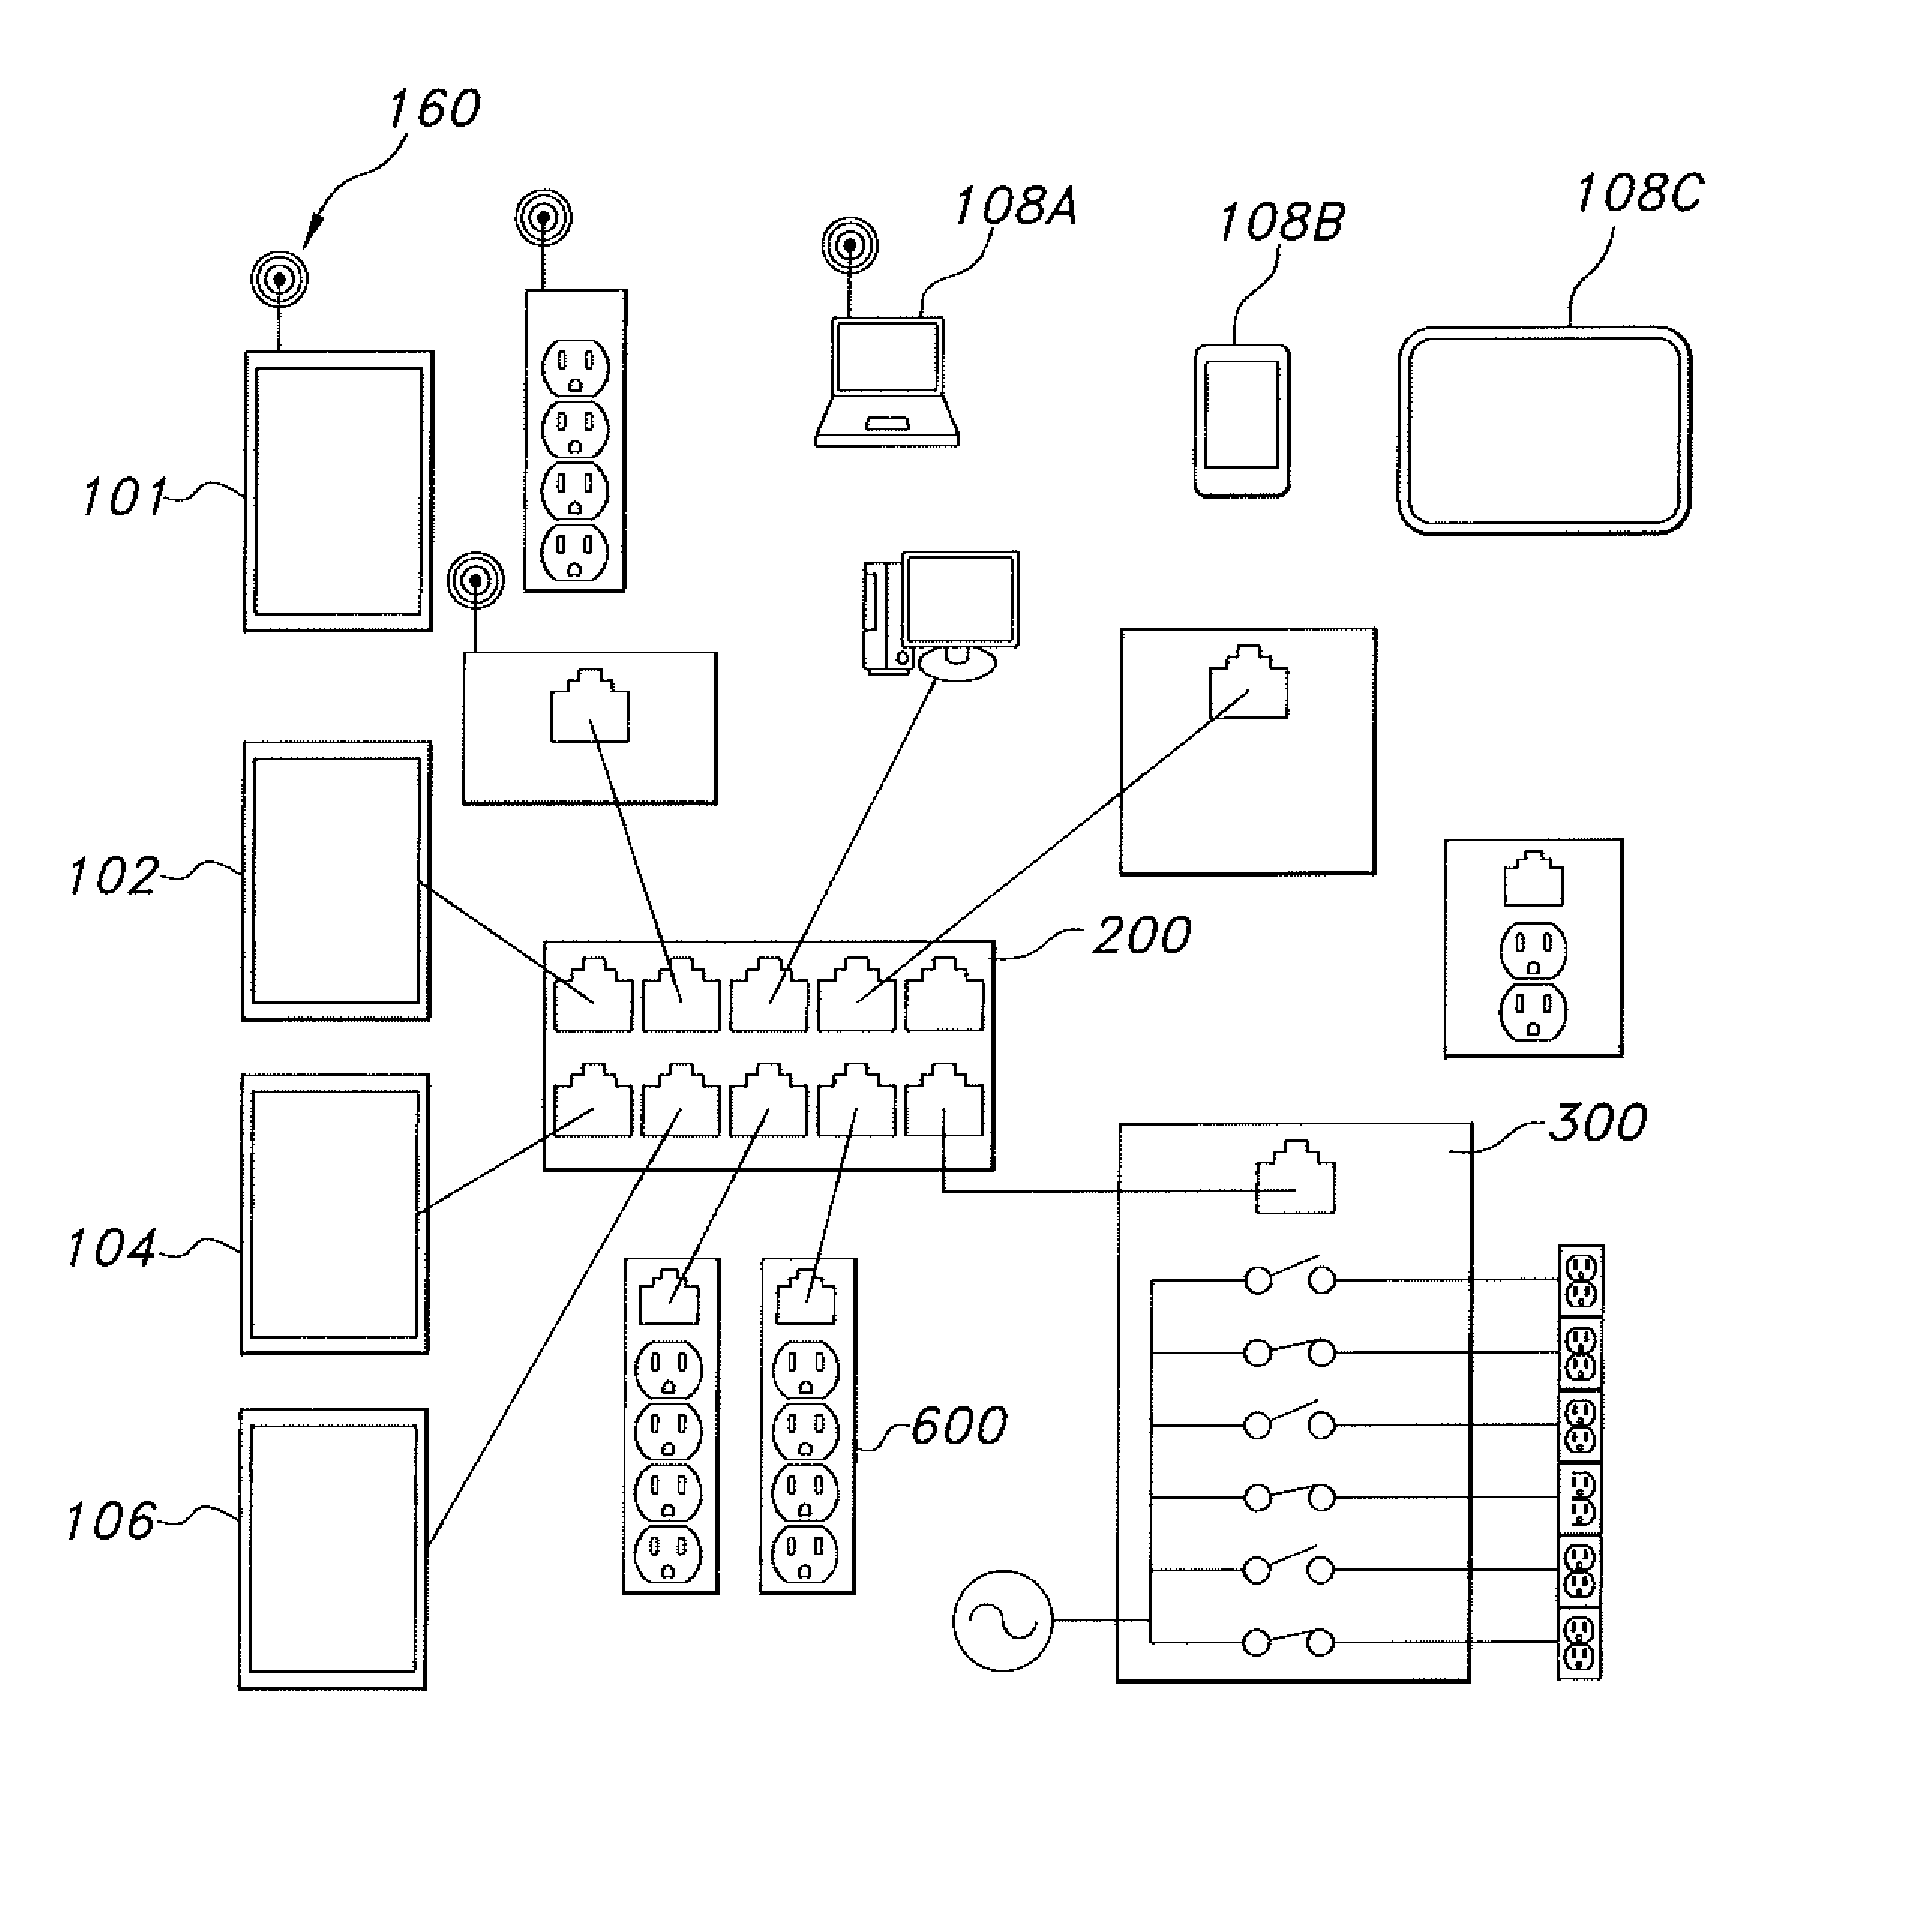 Electrical power distribution and control system and method for remotely controlling power delivery through IP addressable electrical power supply equipment and scanning a network for power control devices